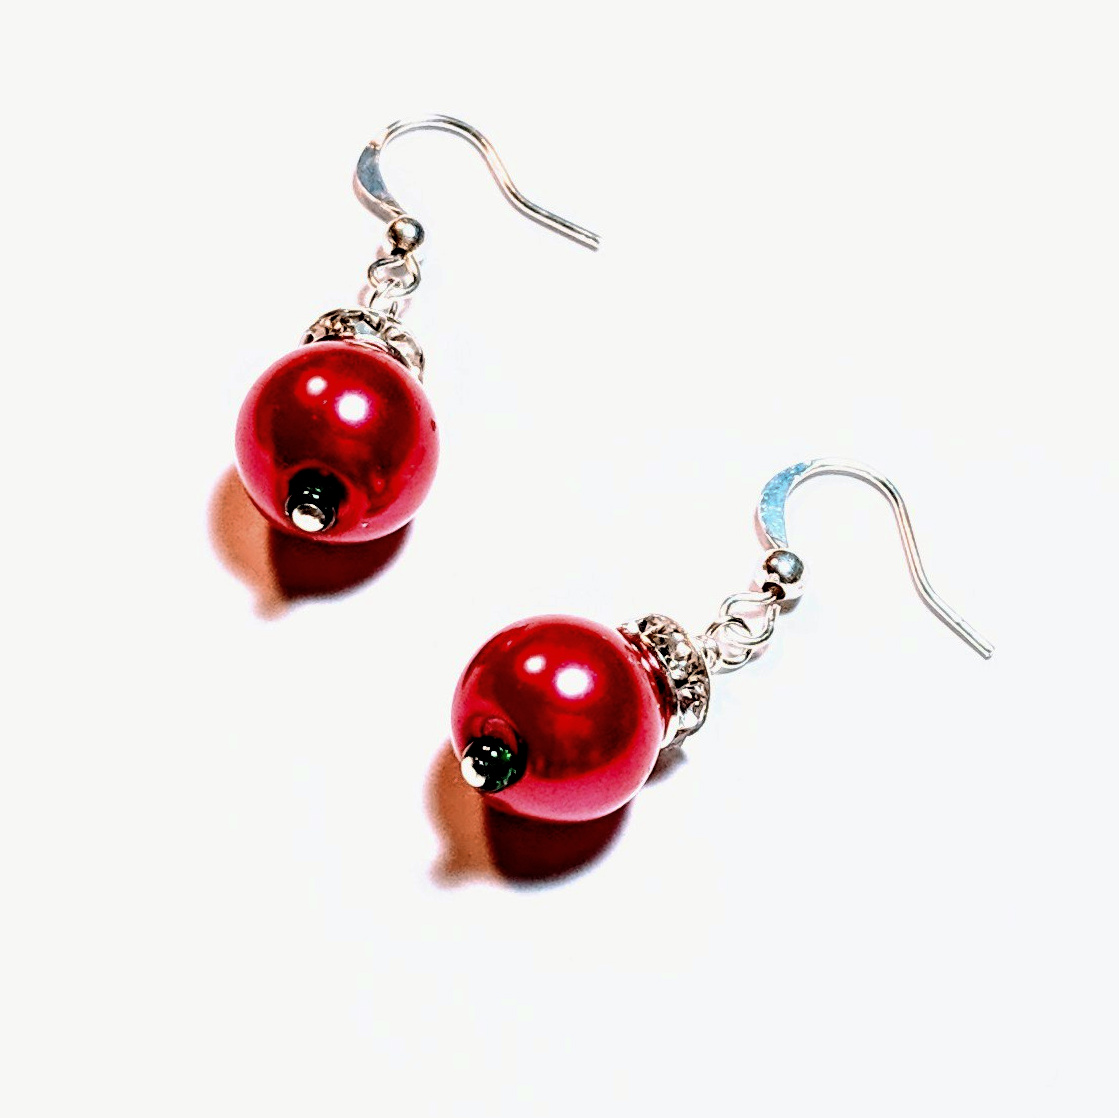 Red Ornament Earrings with Crystal Accents